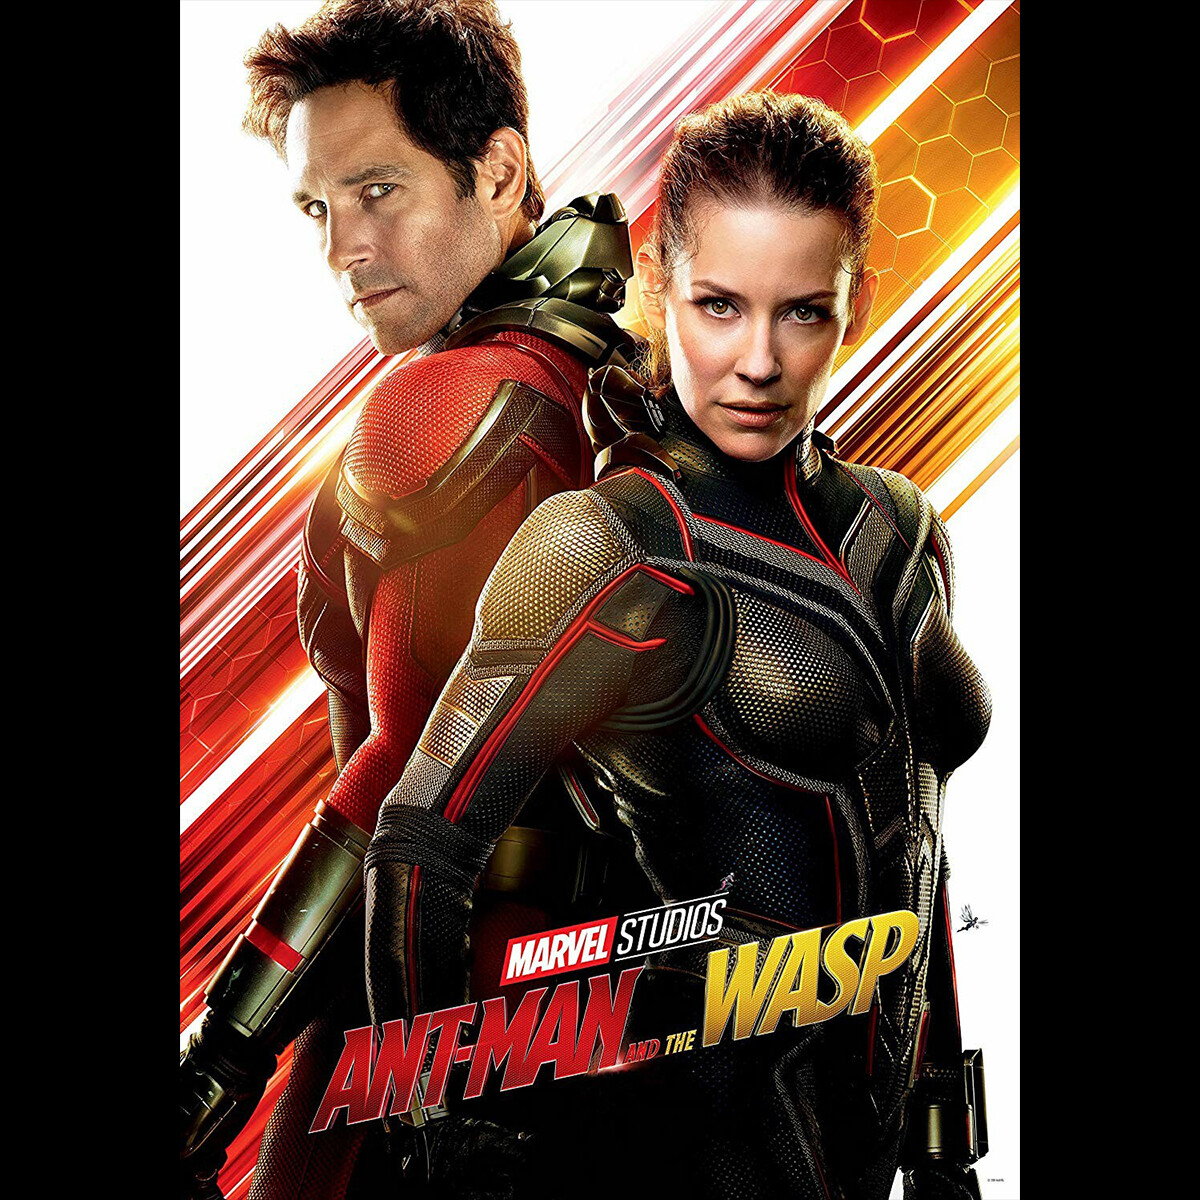 Ant Man and the Wasp